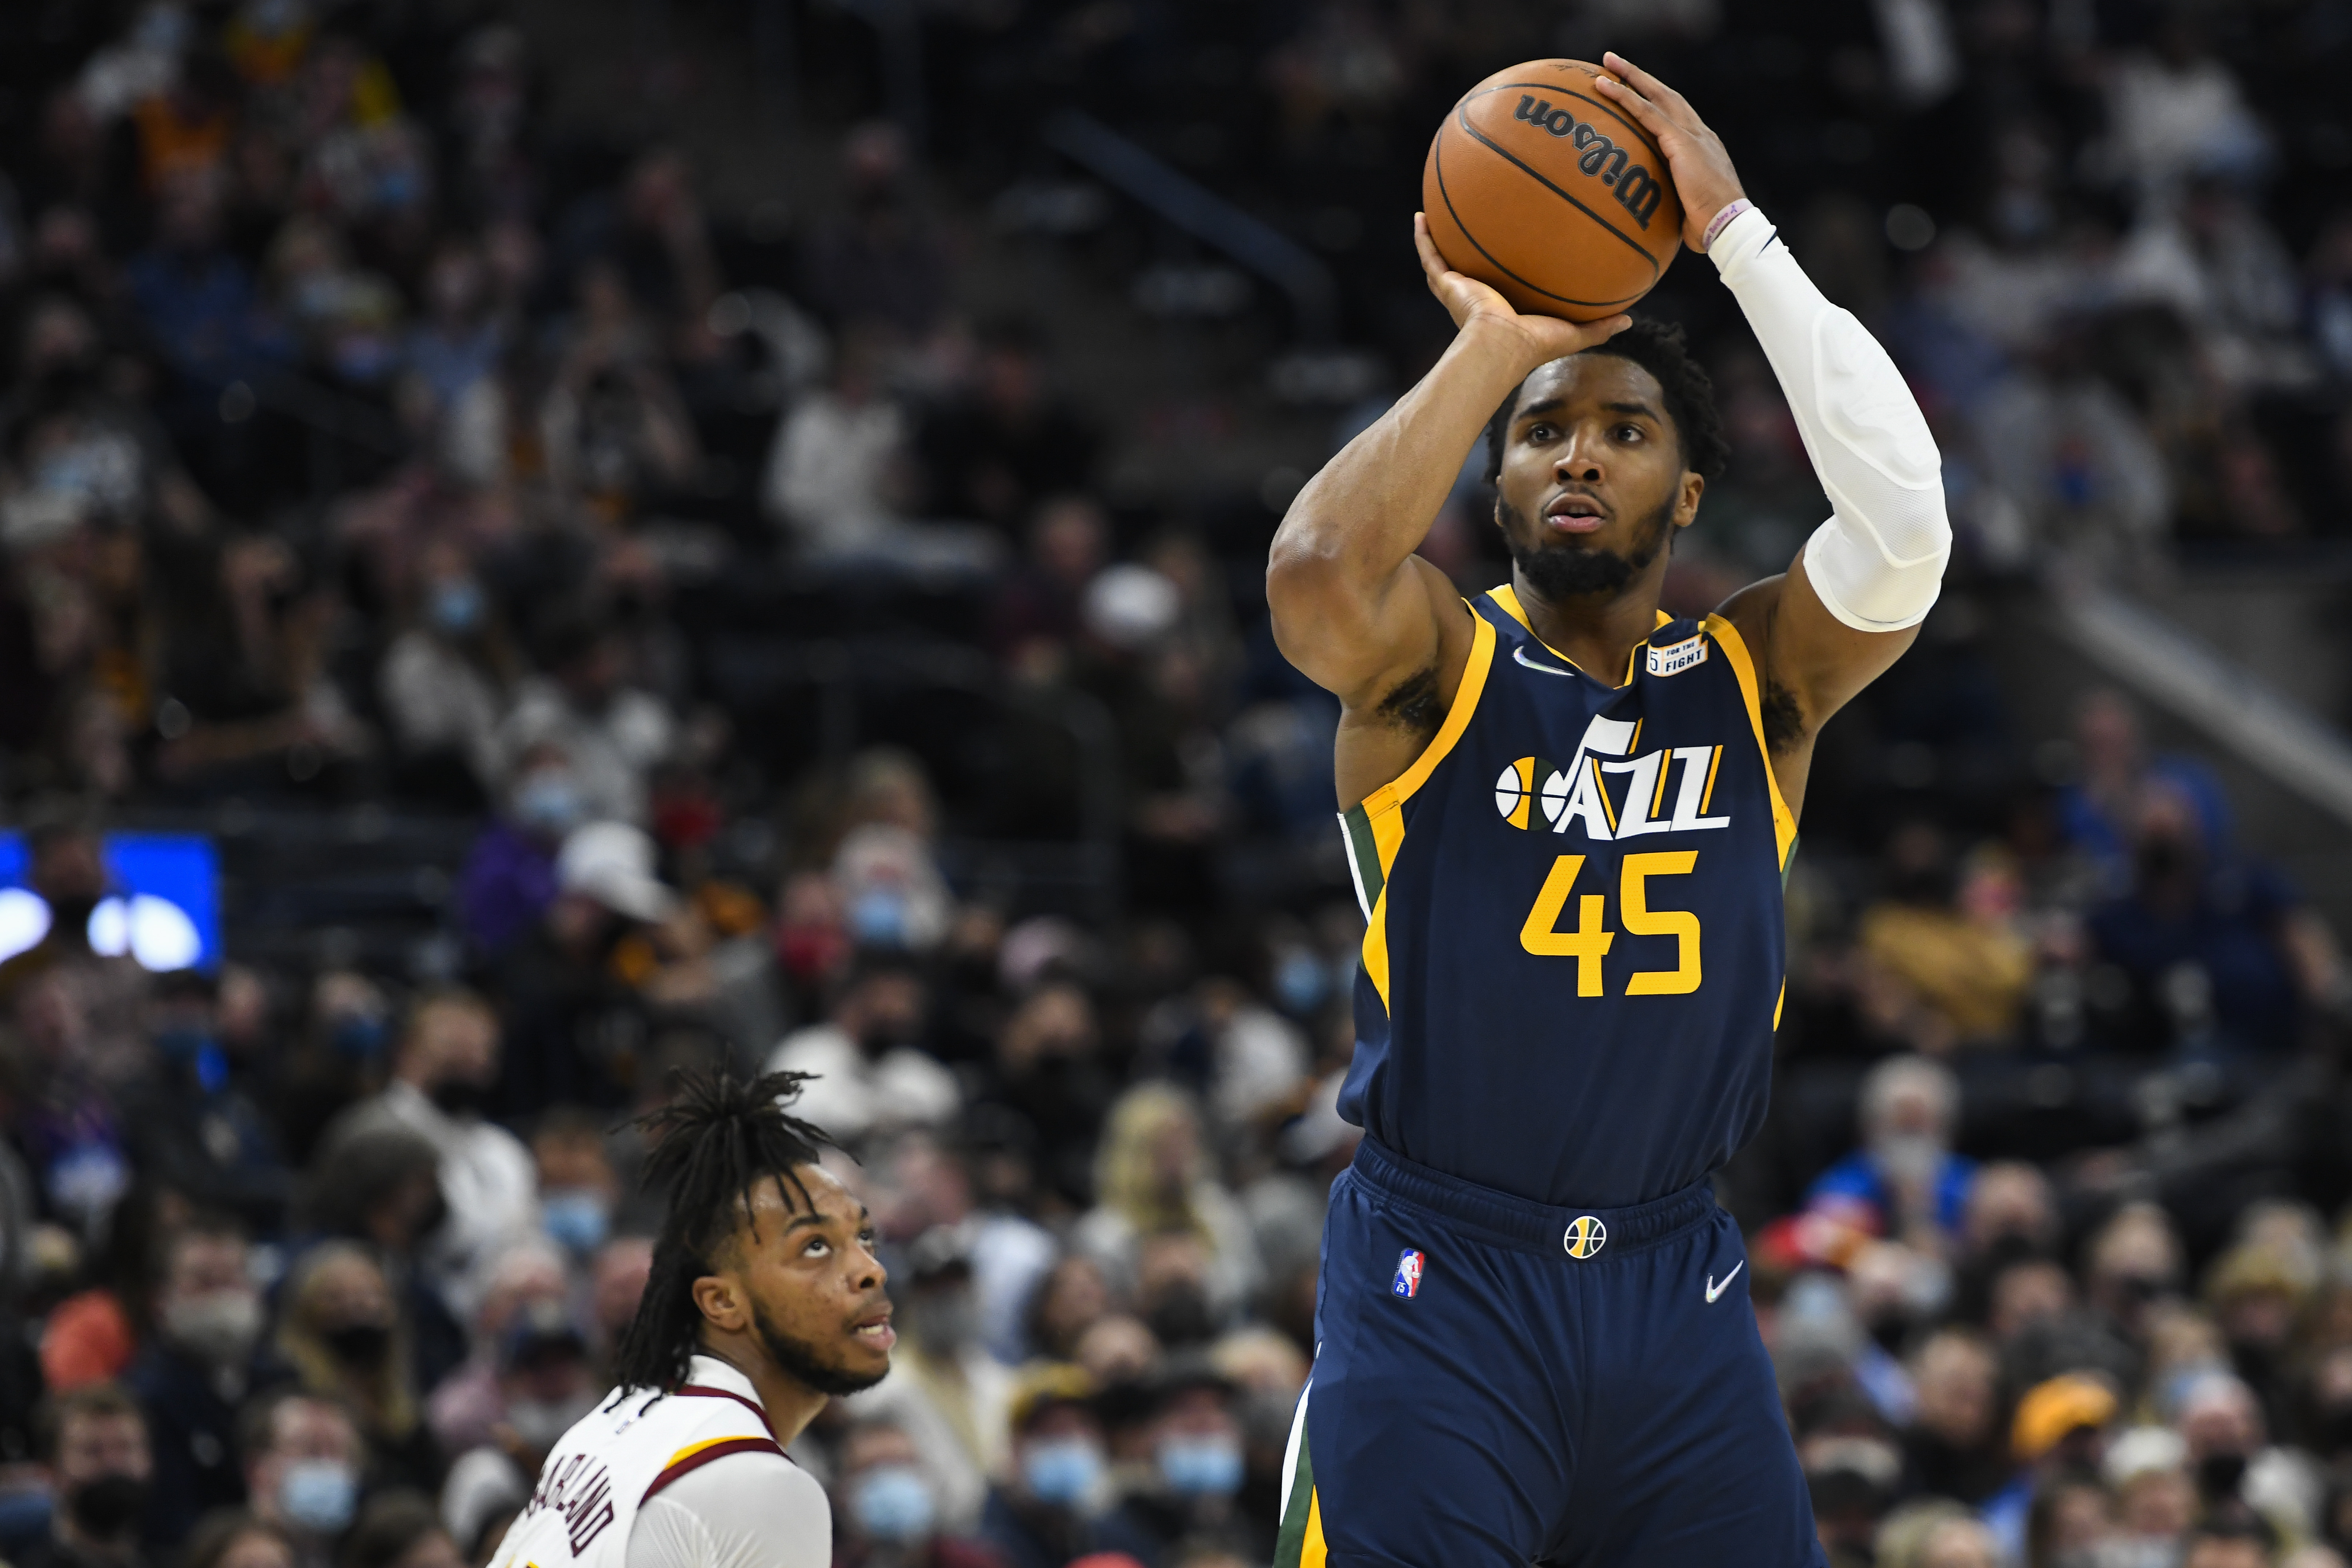 Utah Jazz draft picks: Every pick they own after Donovan Mitchell trade